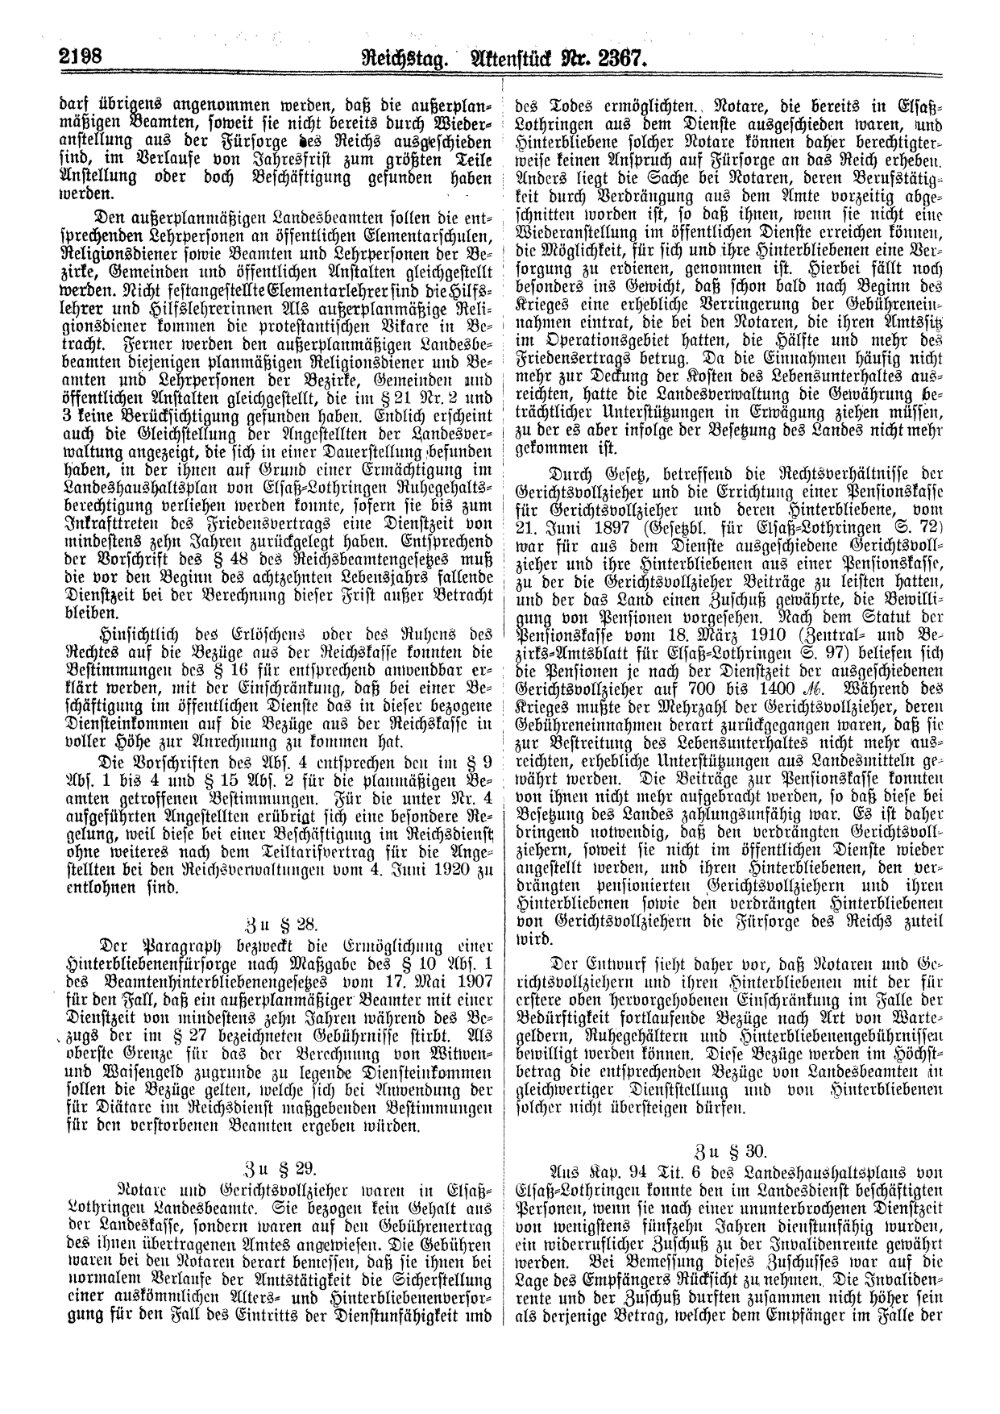 Scan of page 2198